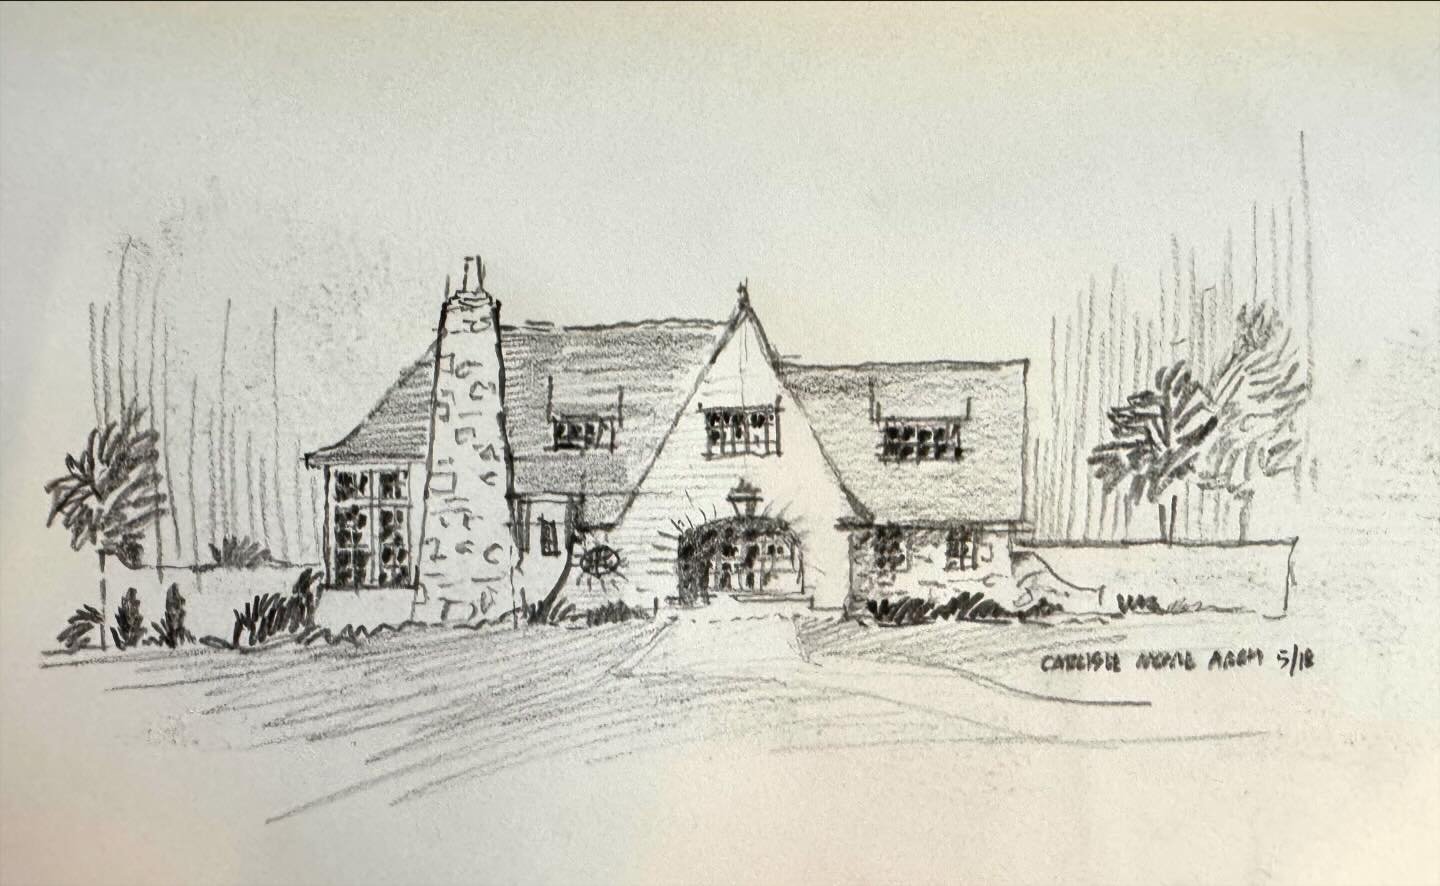 An unrealized sketch from back when we were barely a firm. #architectlife. 
&darr; 
&darr;
&darr;
#architect #TraditionalDesign #ArchitectDesigned #TraditionalHouse #HomeInspiration #Homeinspo #HouseDesign #TraditionalArchitecture #TraditionalHome #T